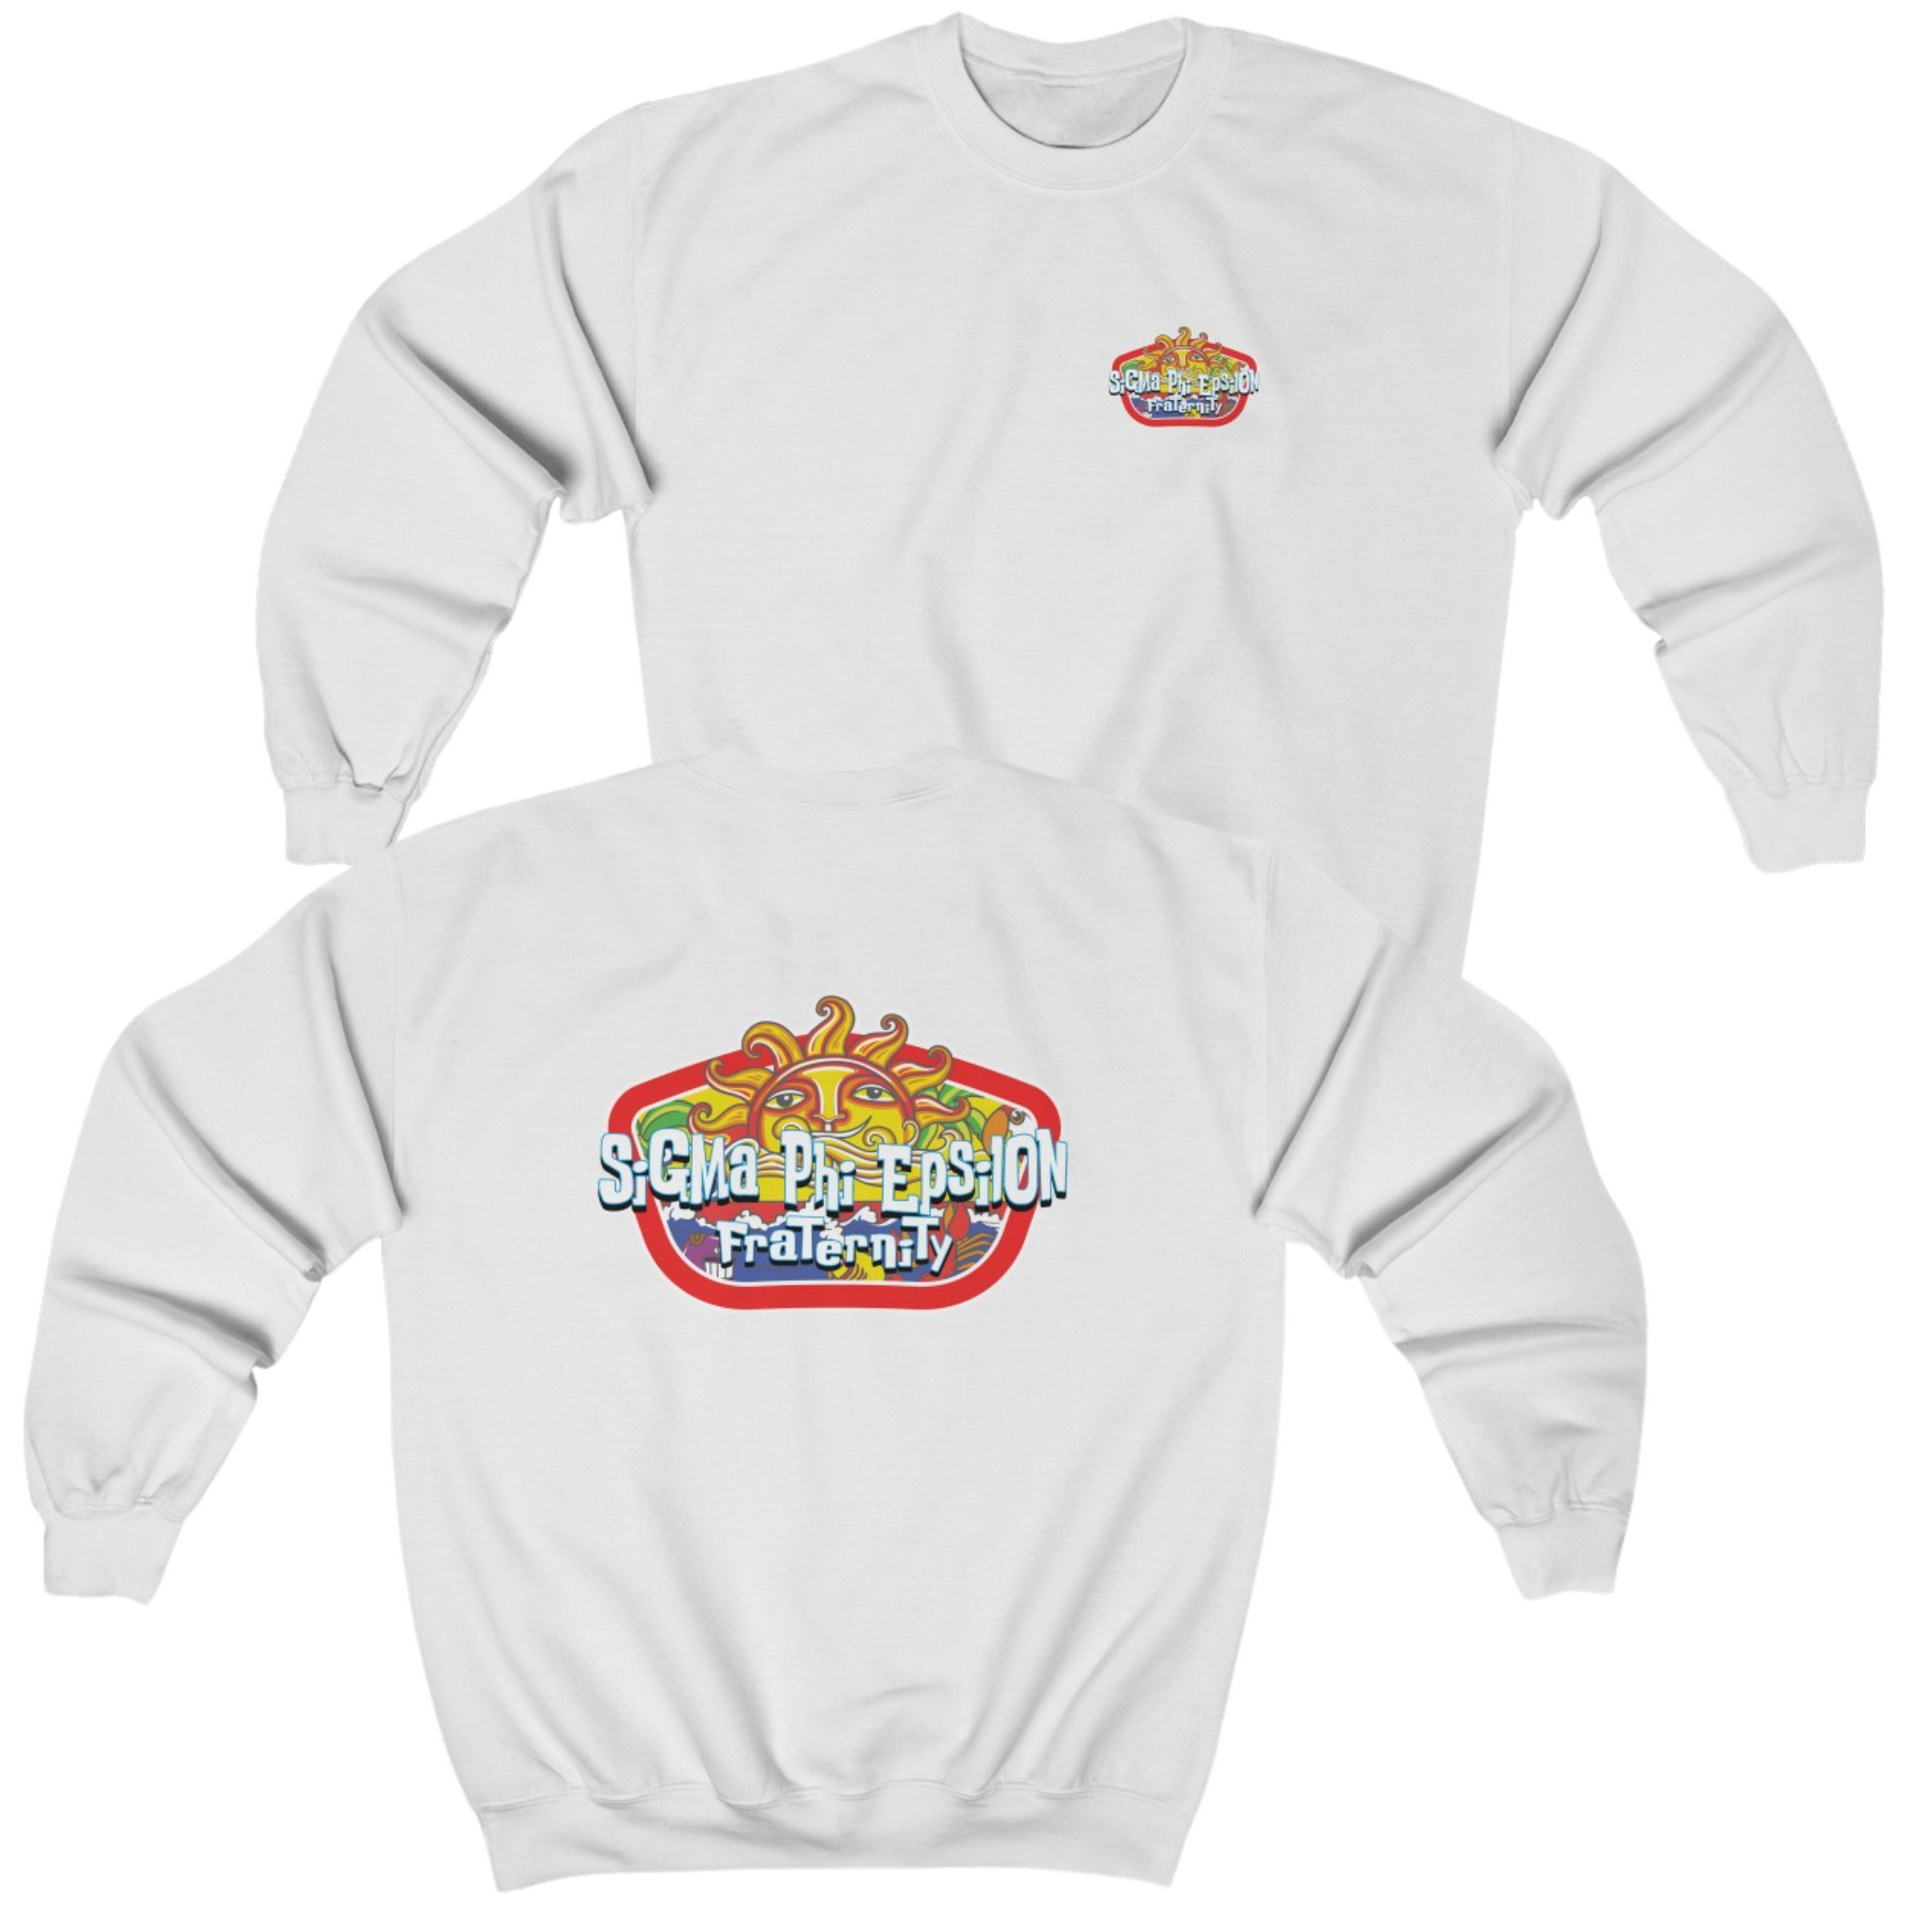 White Sigma Phi Epsilon Graphic Crewneck Sweatshirt | Summer Sol | SigEp Fraternity Clothes and Merchandise